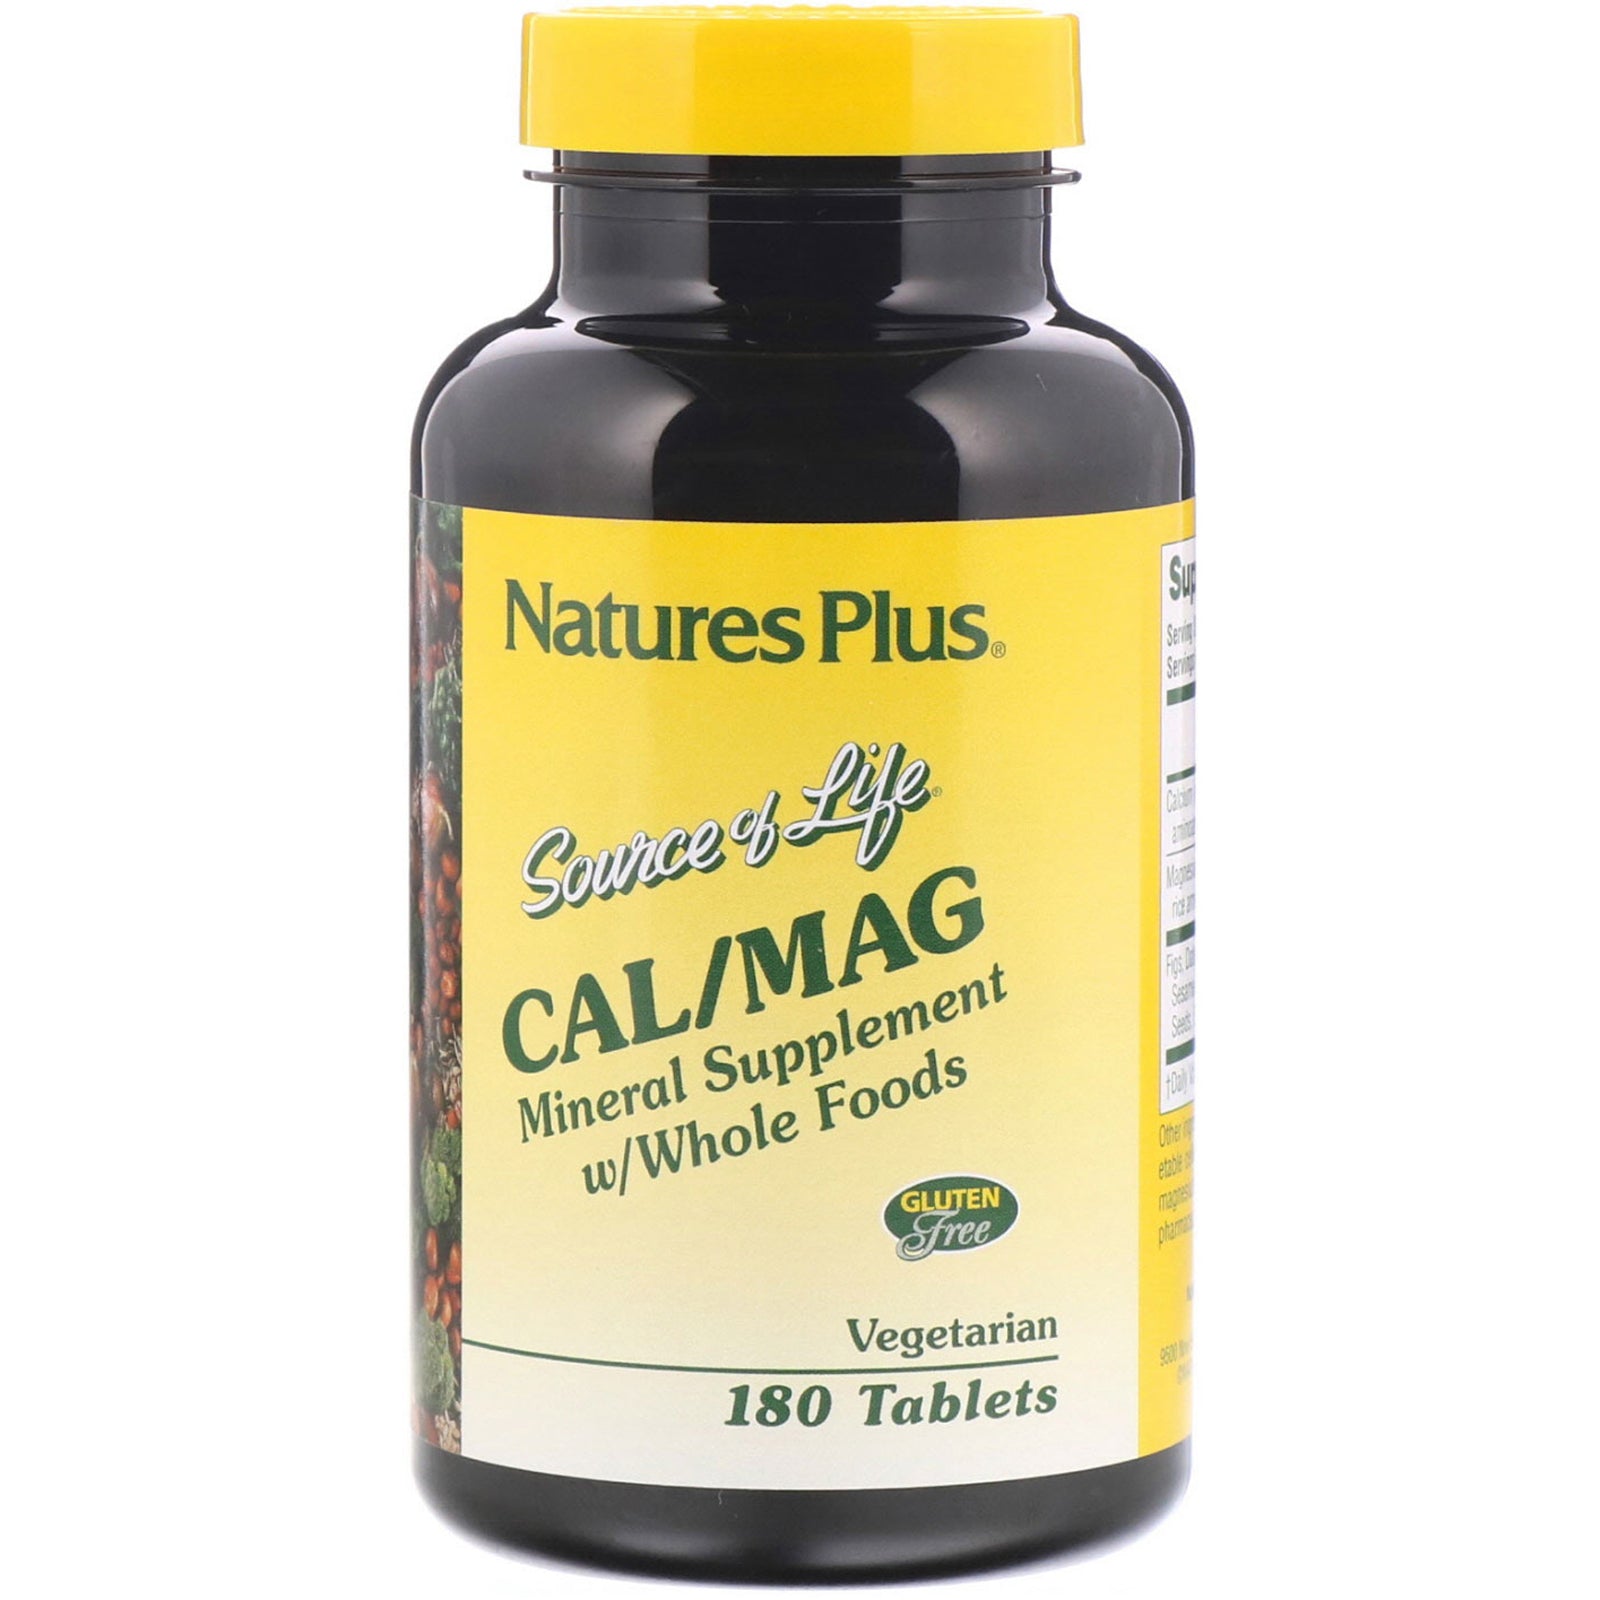 Nature's Plus, Source of Life, Cal/Mag, Mineral Supplement w/ Whole Foods, 180 Tablets